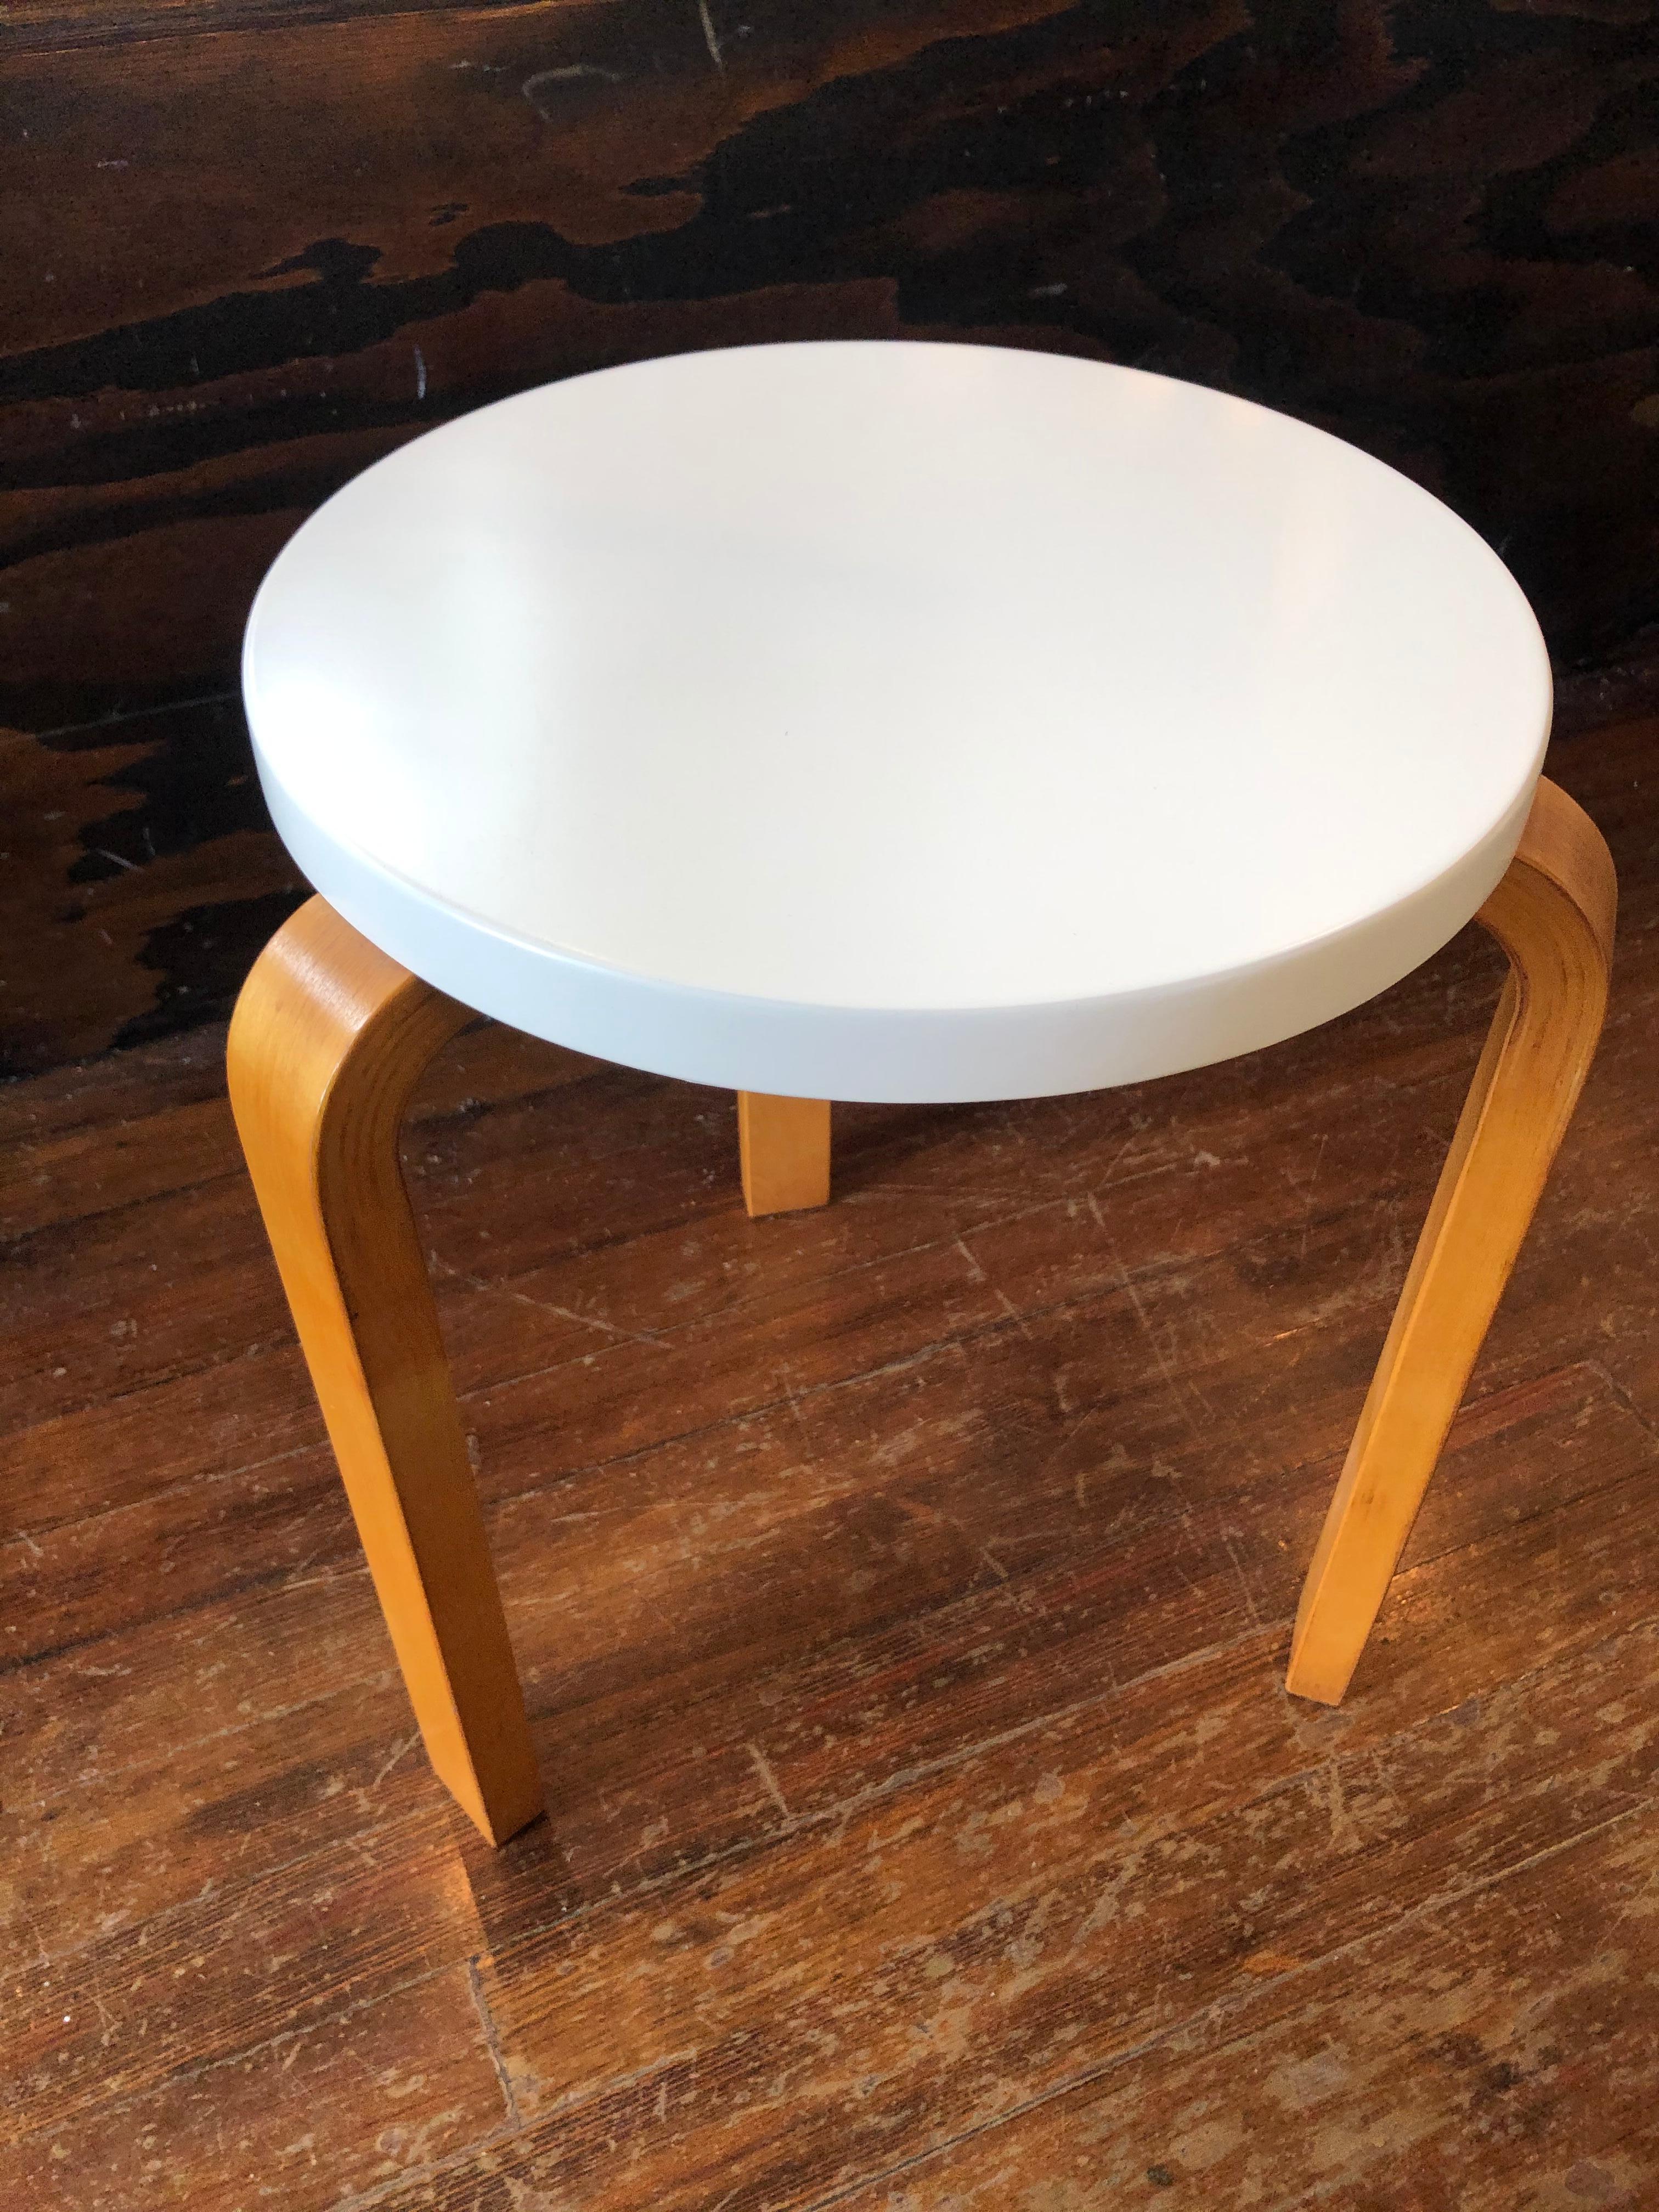 20th Century Alvar Aalto Early Finsven Stamped Stool / Small Table Lacquer Top